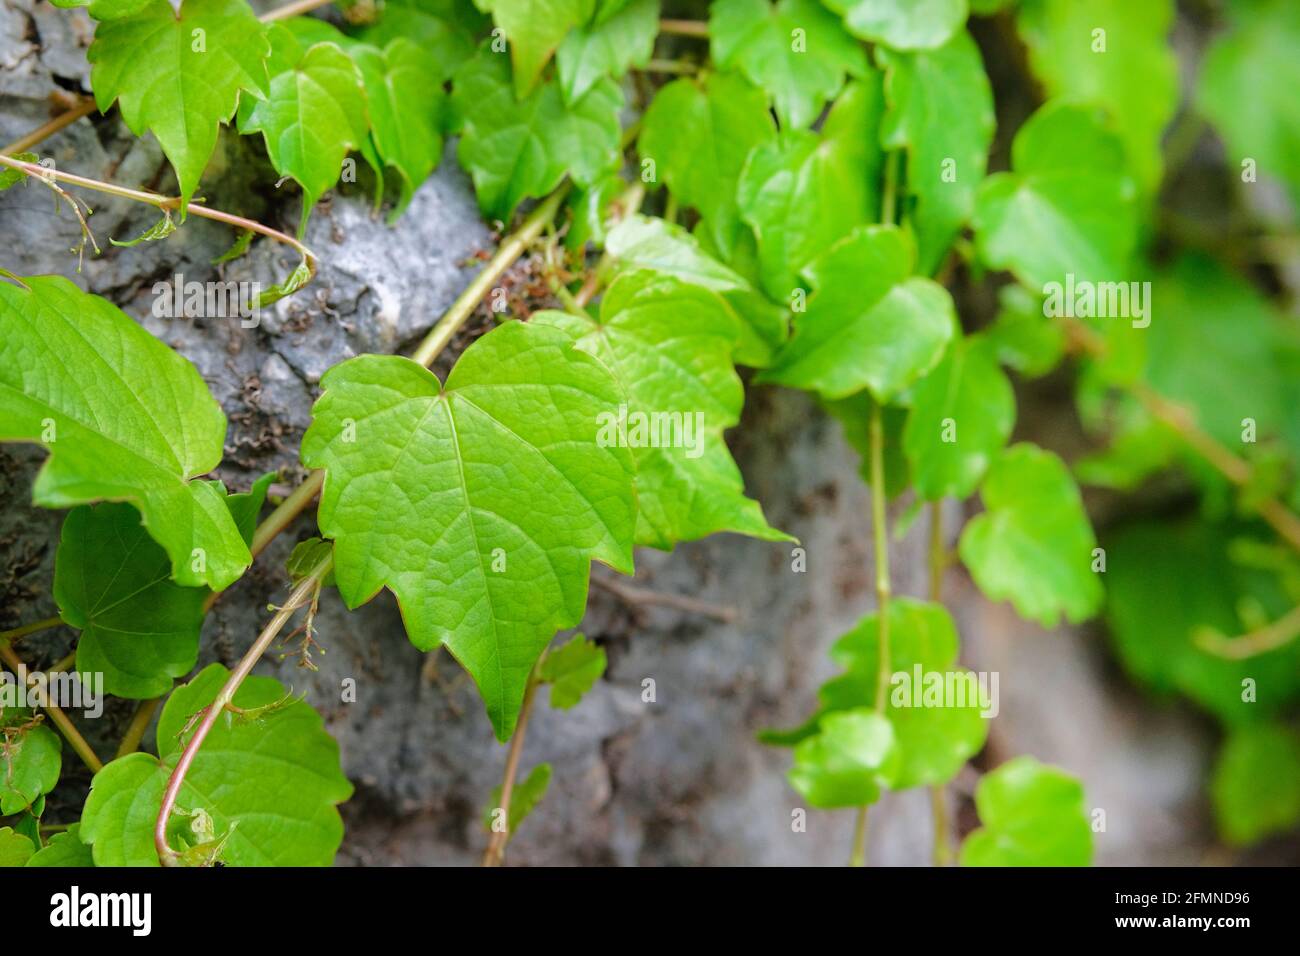 Climbing plant covering the wall. Green leaves nature blurred background. Landscape design. Stock Photo